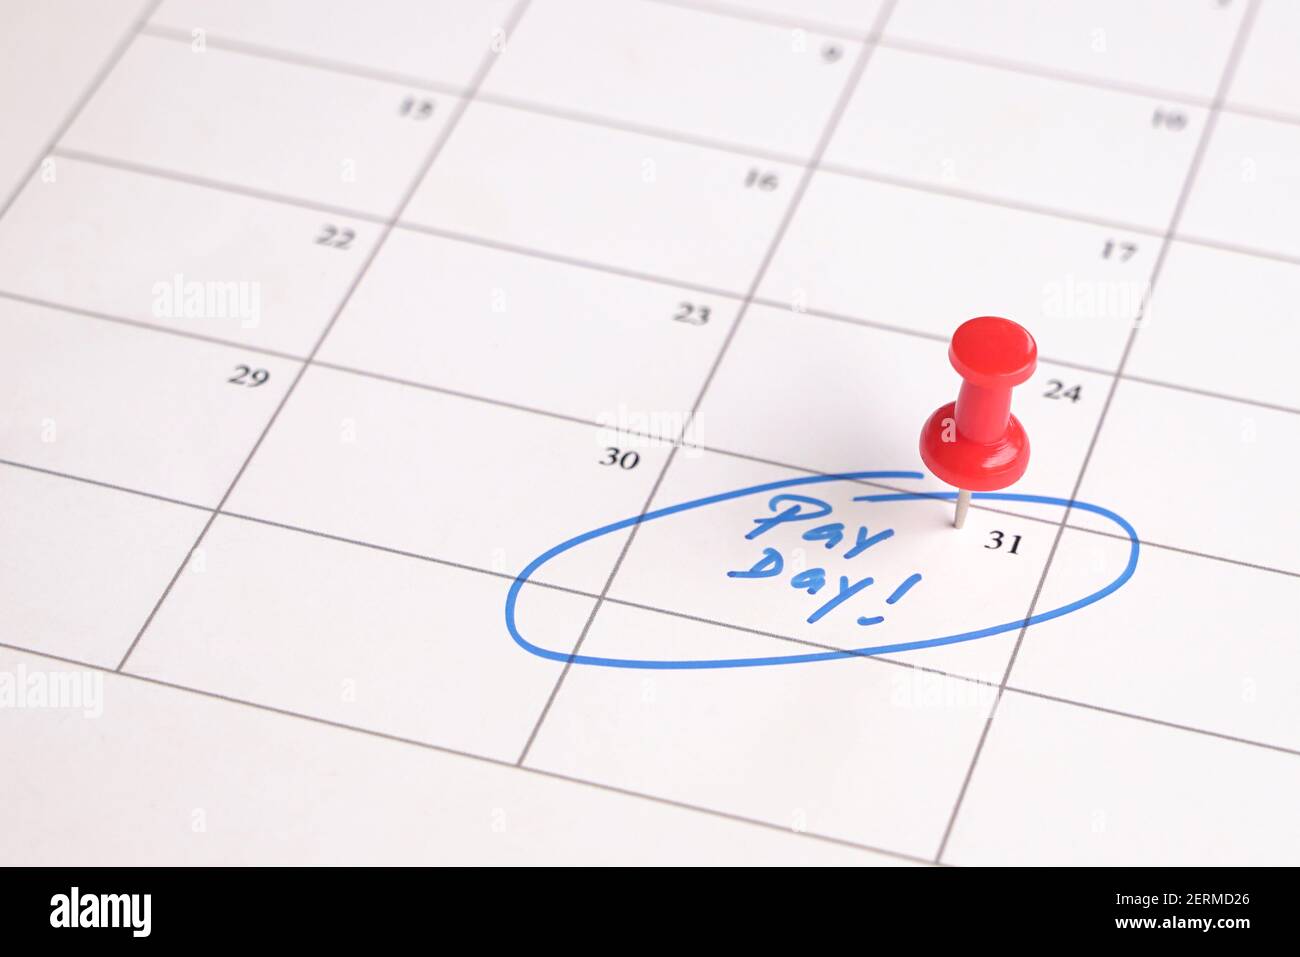 Red pin on calendar with words, pay day written. Salary reminder concept. Stock Photo